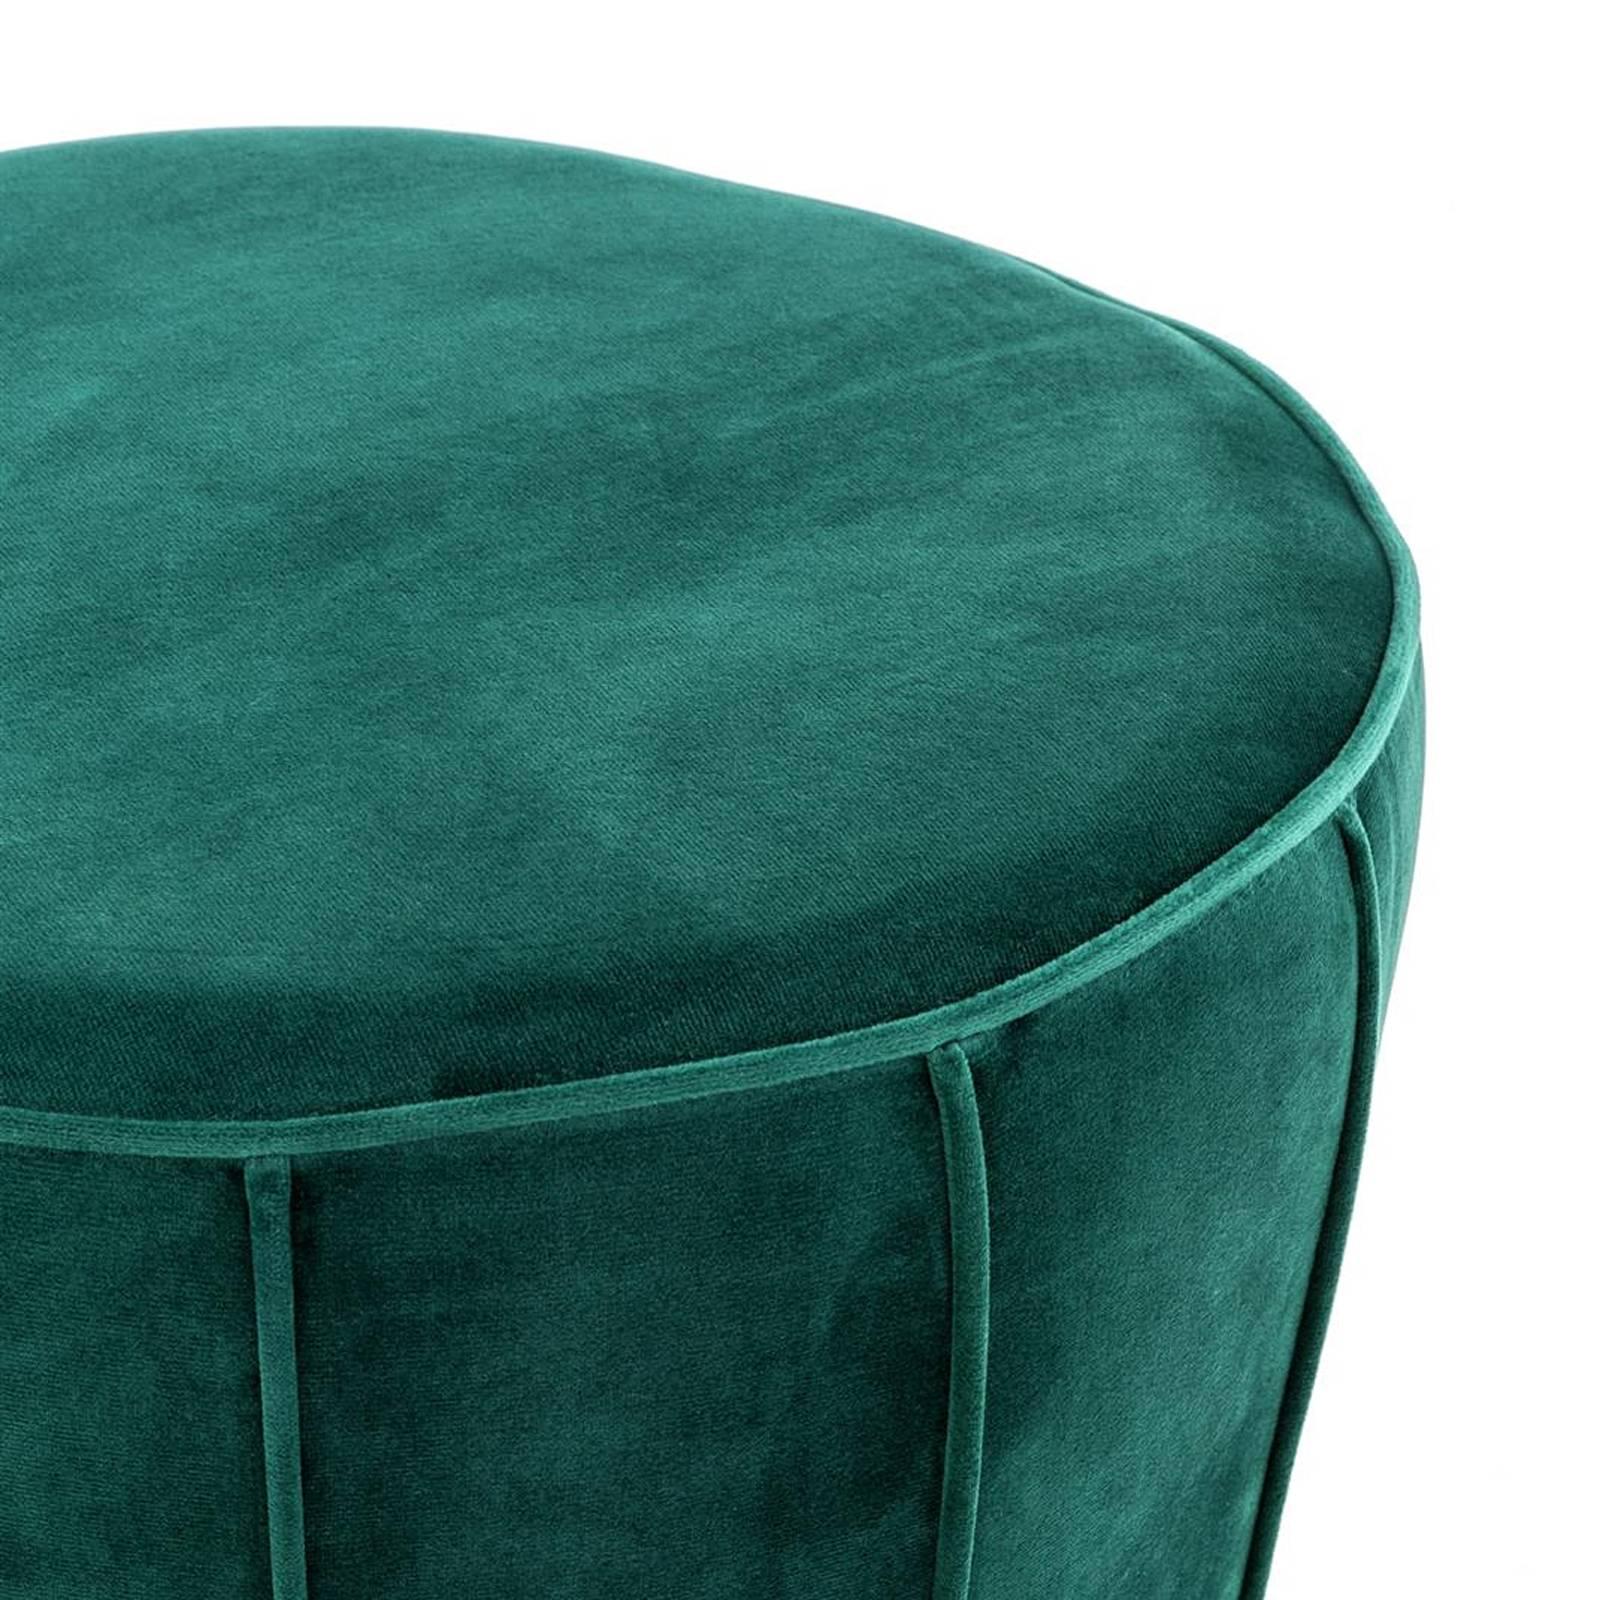 Hand-Crafted Saloon Stool in Green Velvet Fabric and Champagne Gold Finish